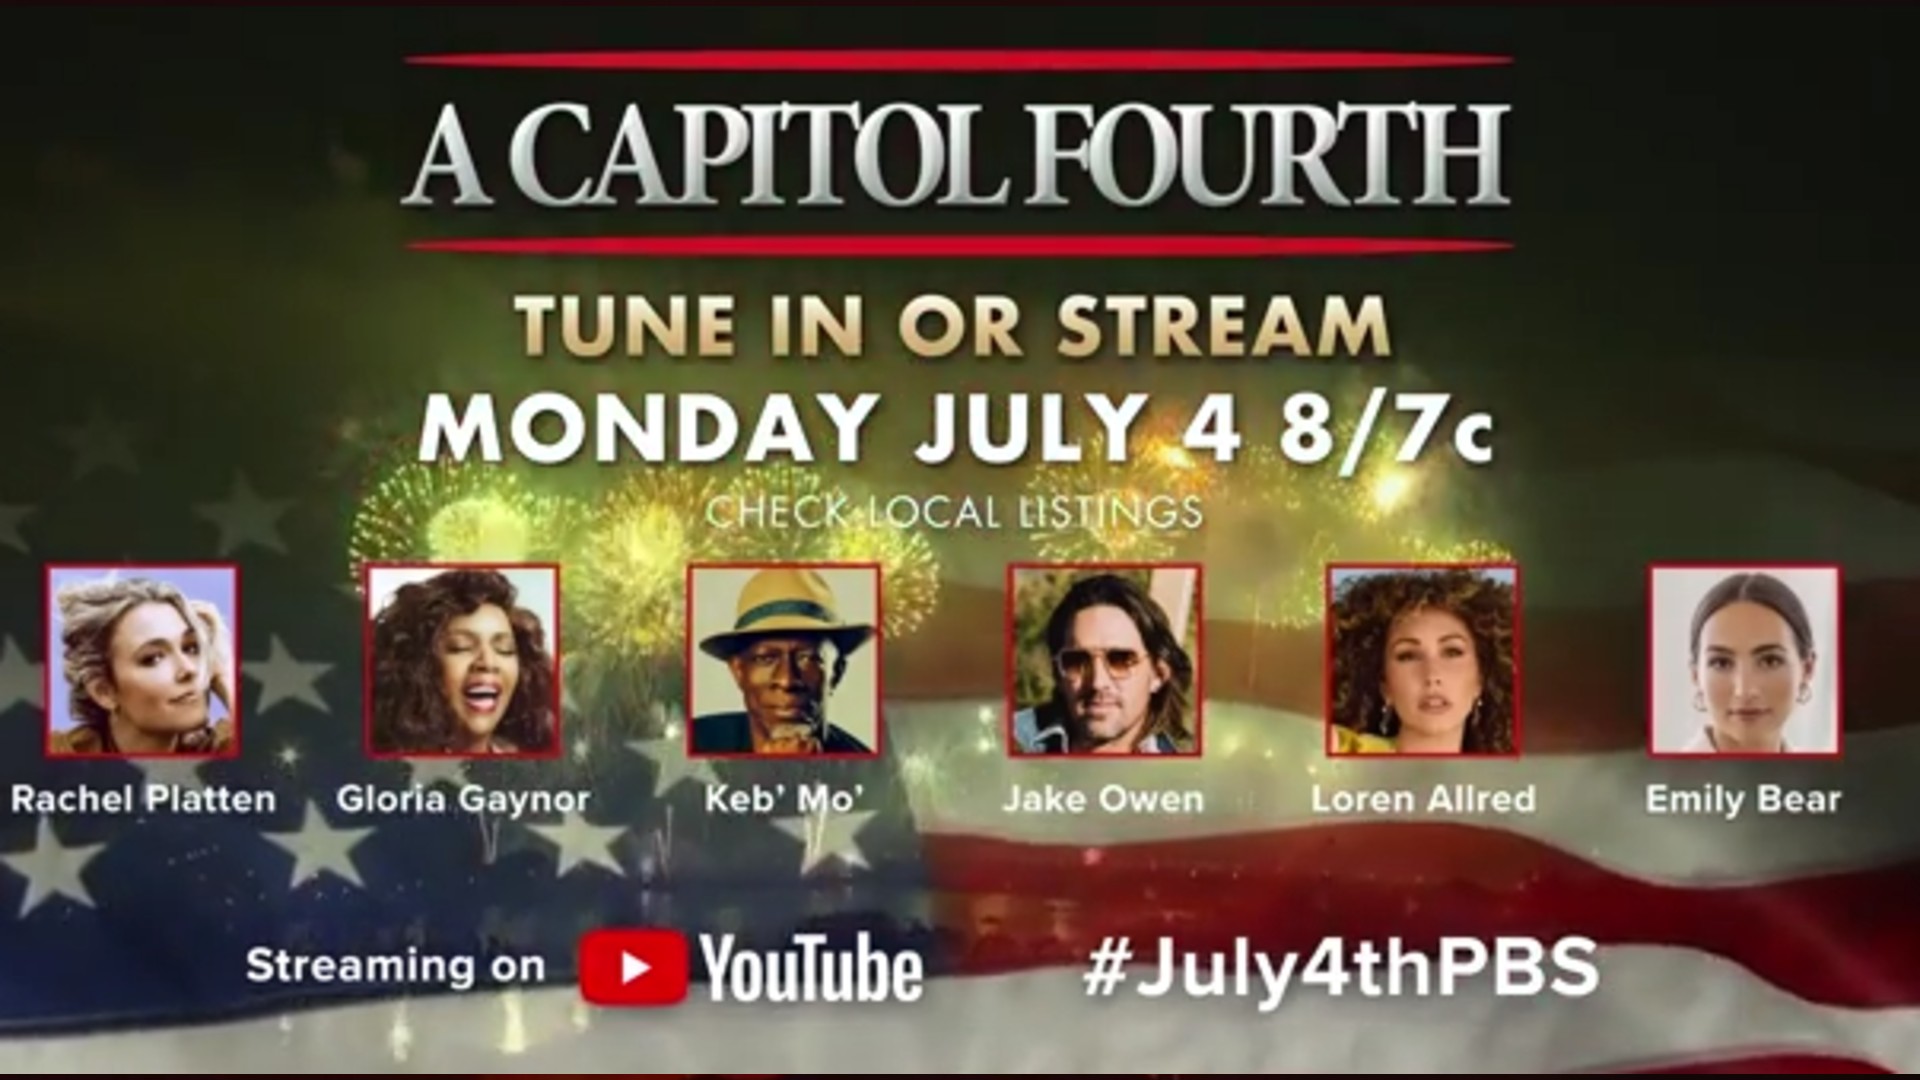 Play Video: The cast of “A Capitol Fourth” on PBS